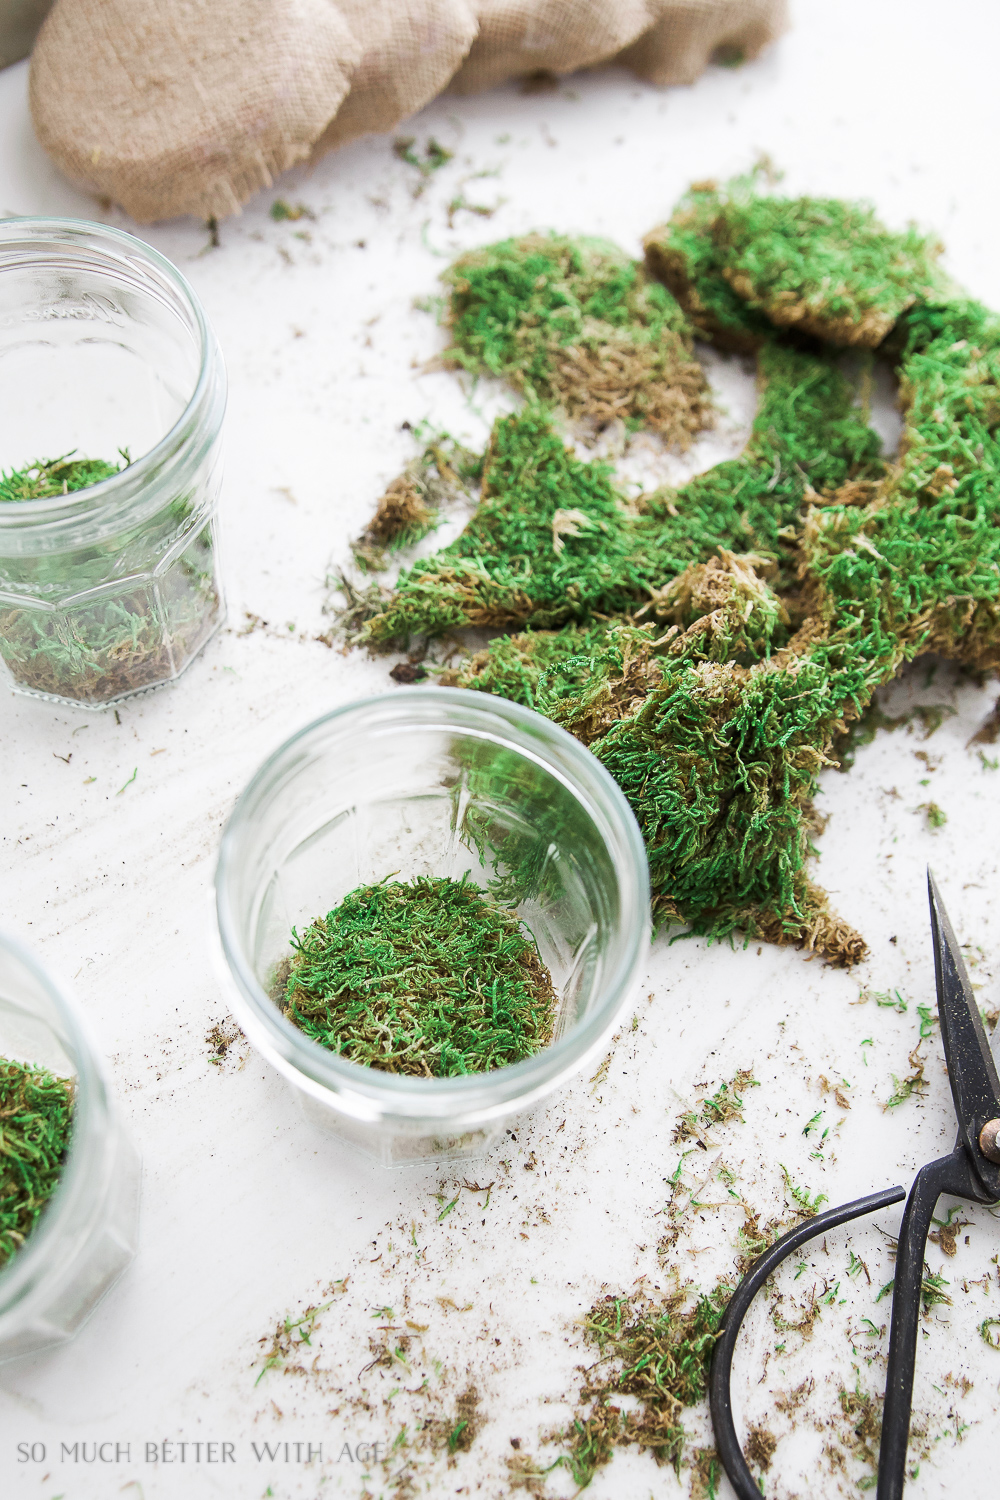 Putting the moss into the clear jars.